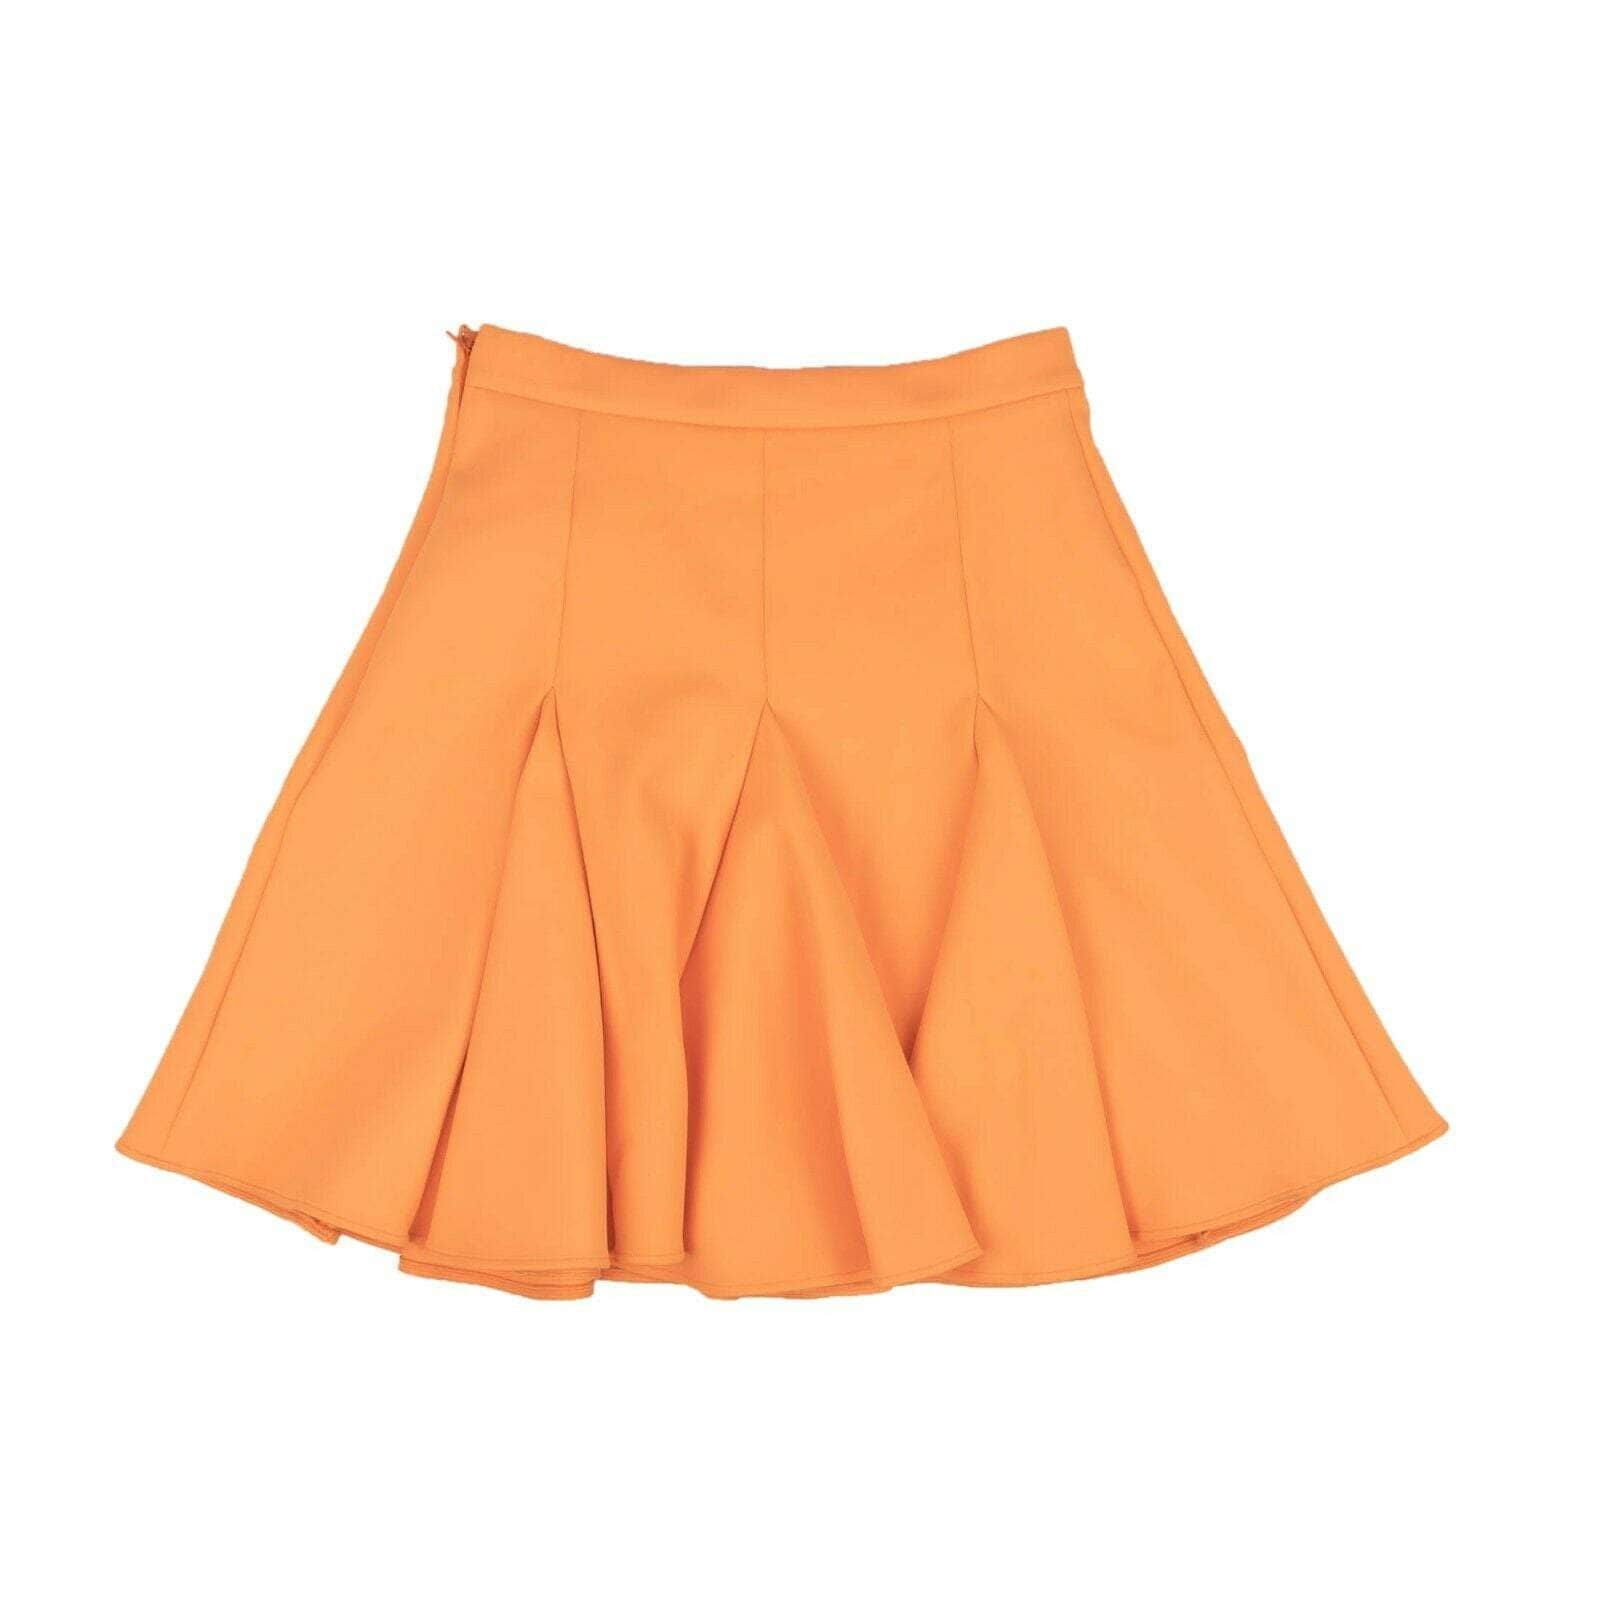 OFF-WHITE c/o VIRGIL ABLOH 500-750, channelenable-all, chicmi, couponcollection, gender-womens, main-clothing, off-white-c-o-virgil-abloh, OWW, size-40, womens-mini-skirts 40 Orange Scuba Skater Skirt 95-OFW-0108/40 95-OFW-0108/40